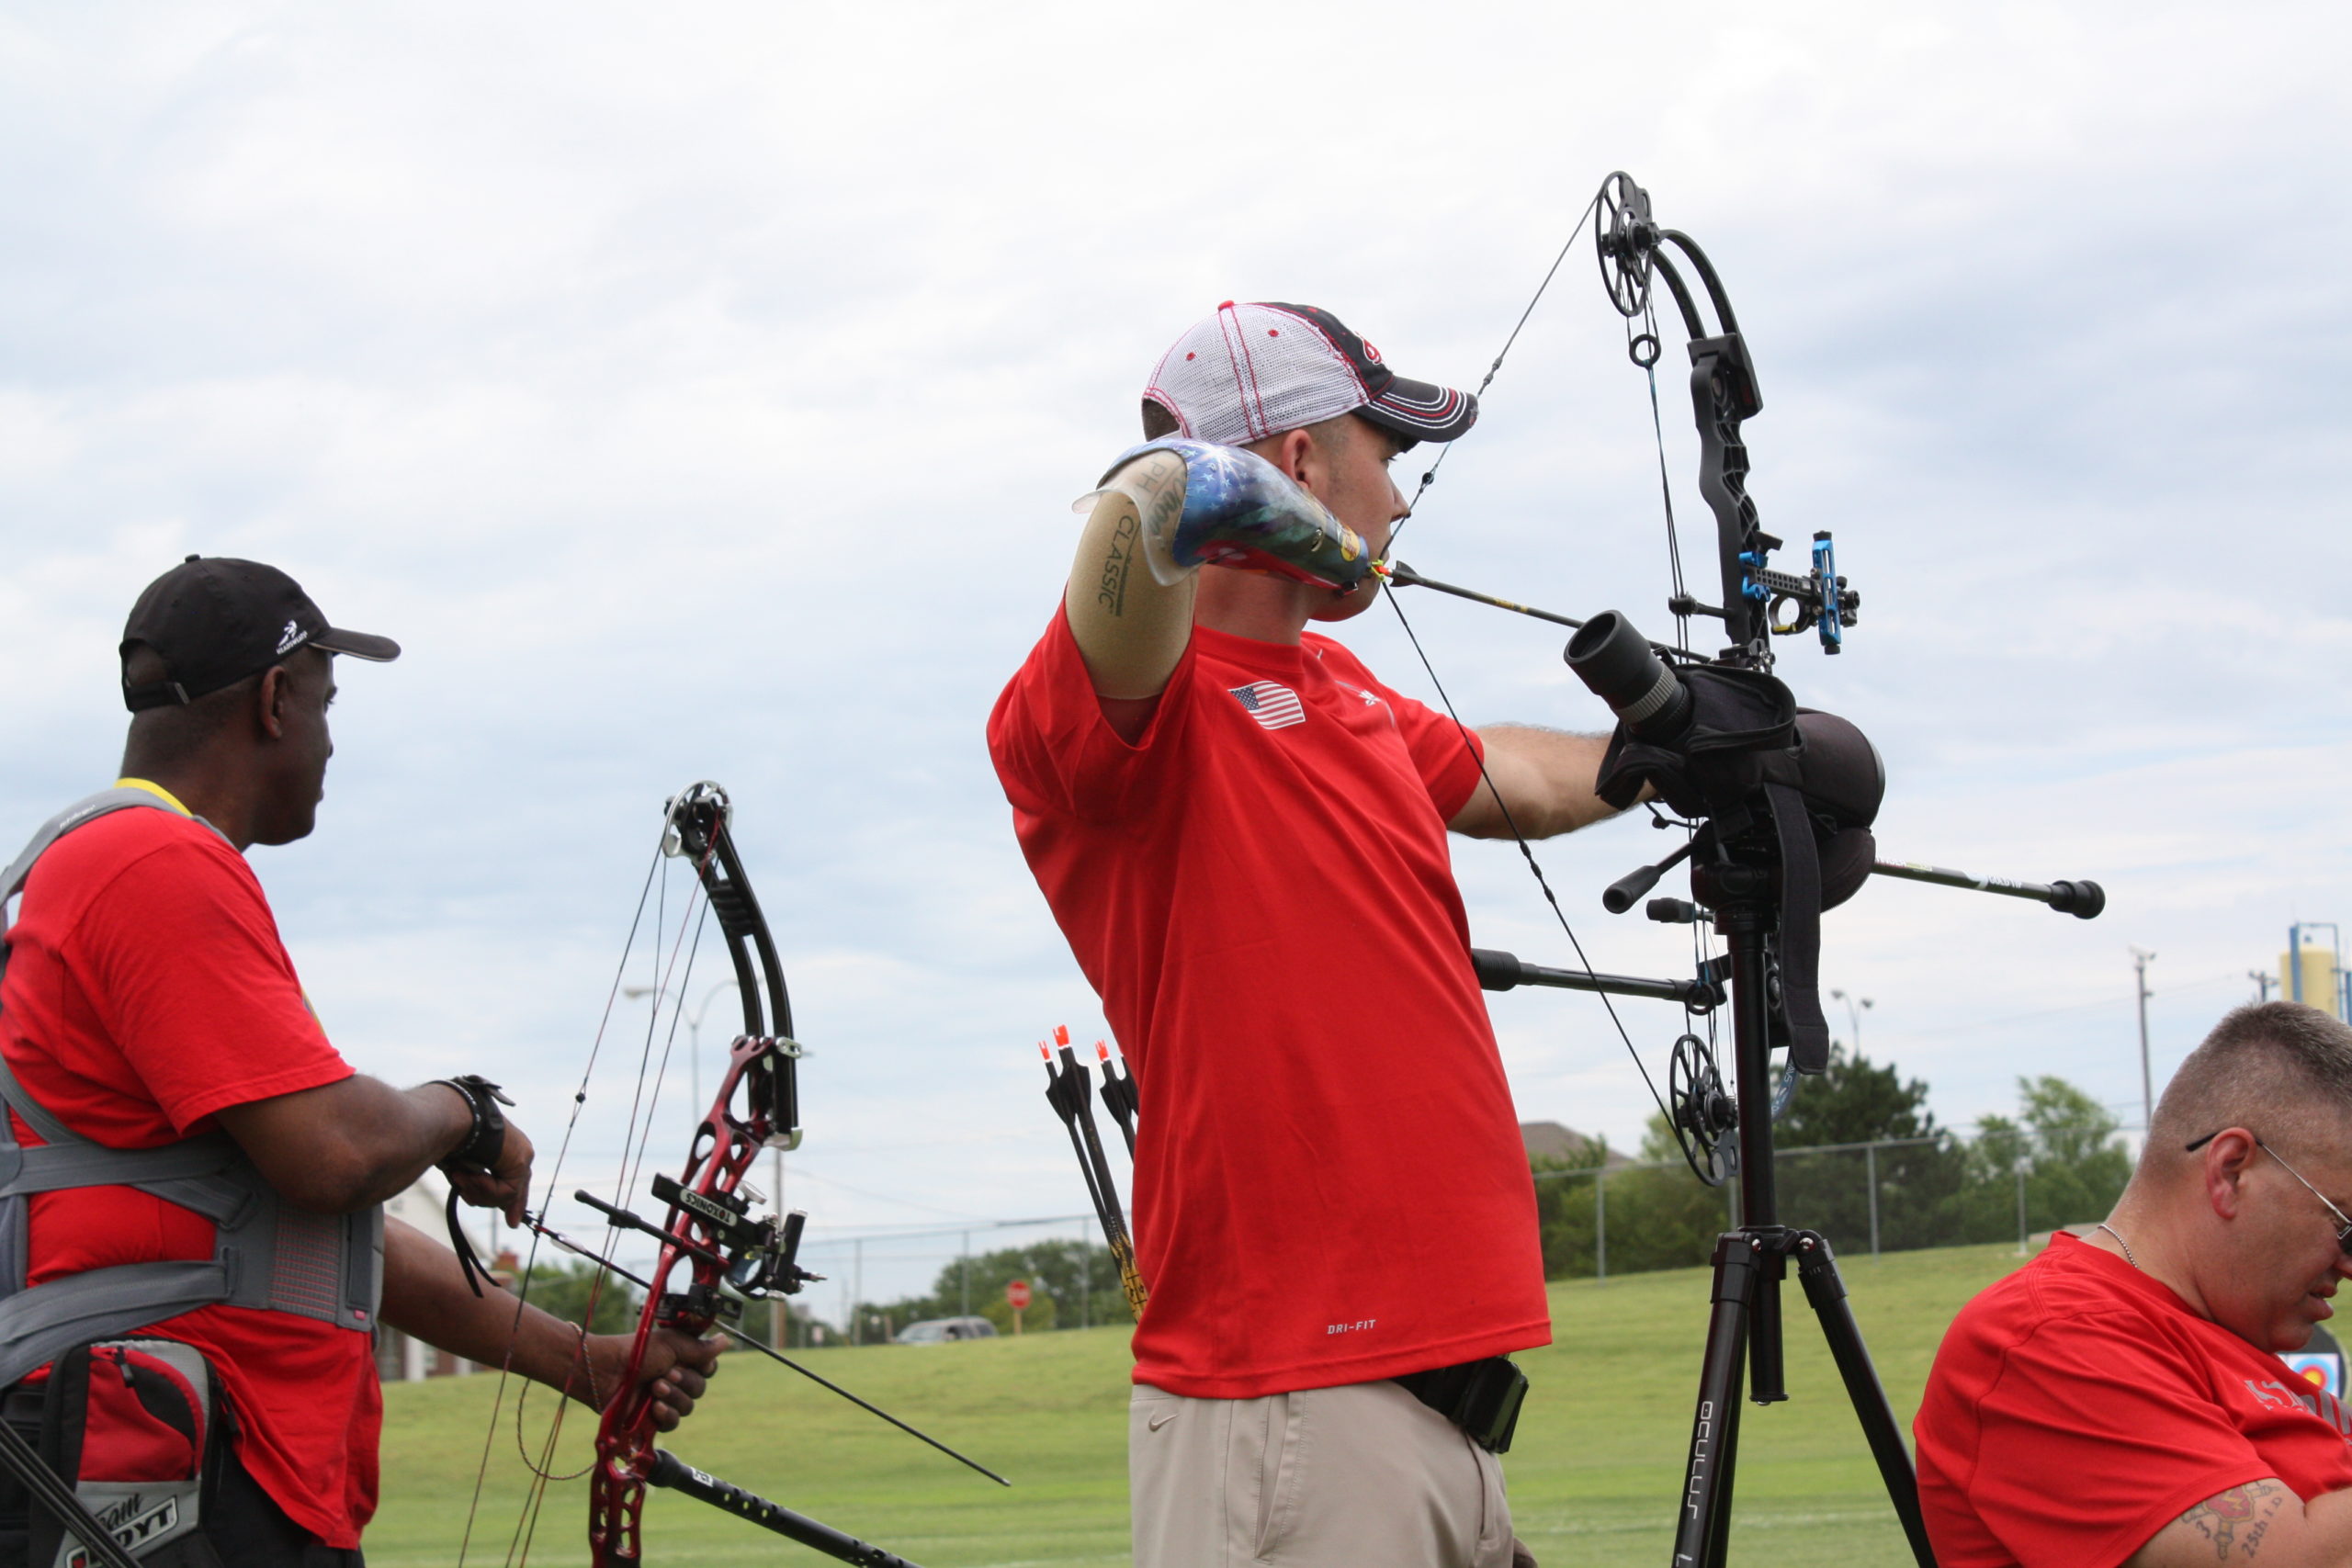 three athletes wearing red shirts competing in archery. One athlete uses a prosthetic arm; an athlete using a wheelchair aims his bow while an onlooker watches; a woman using a wheelchair aims her bow at a target in the middle of a grassy field; an adaptive athlete using his shoulder and foot to hold and aim his bow during an archery competition